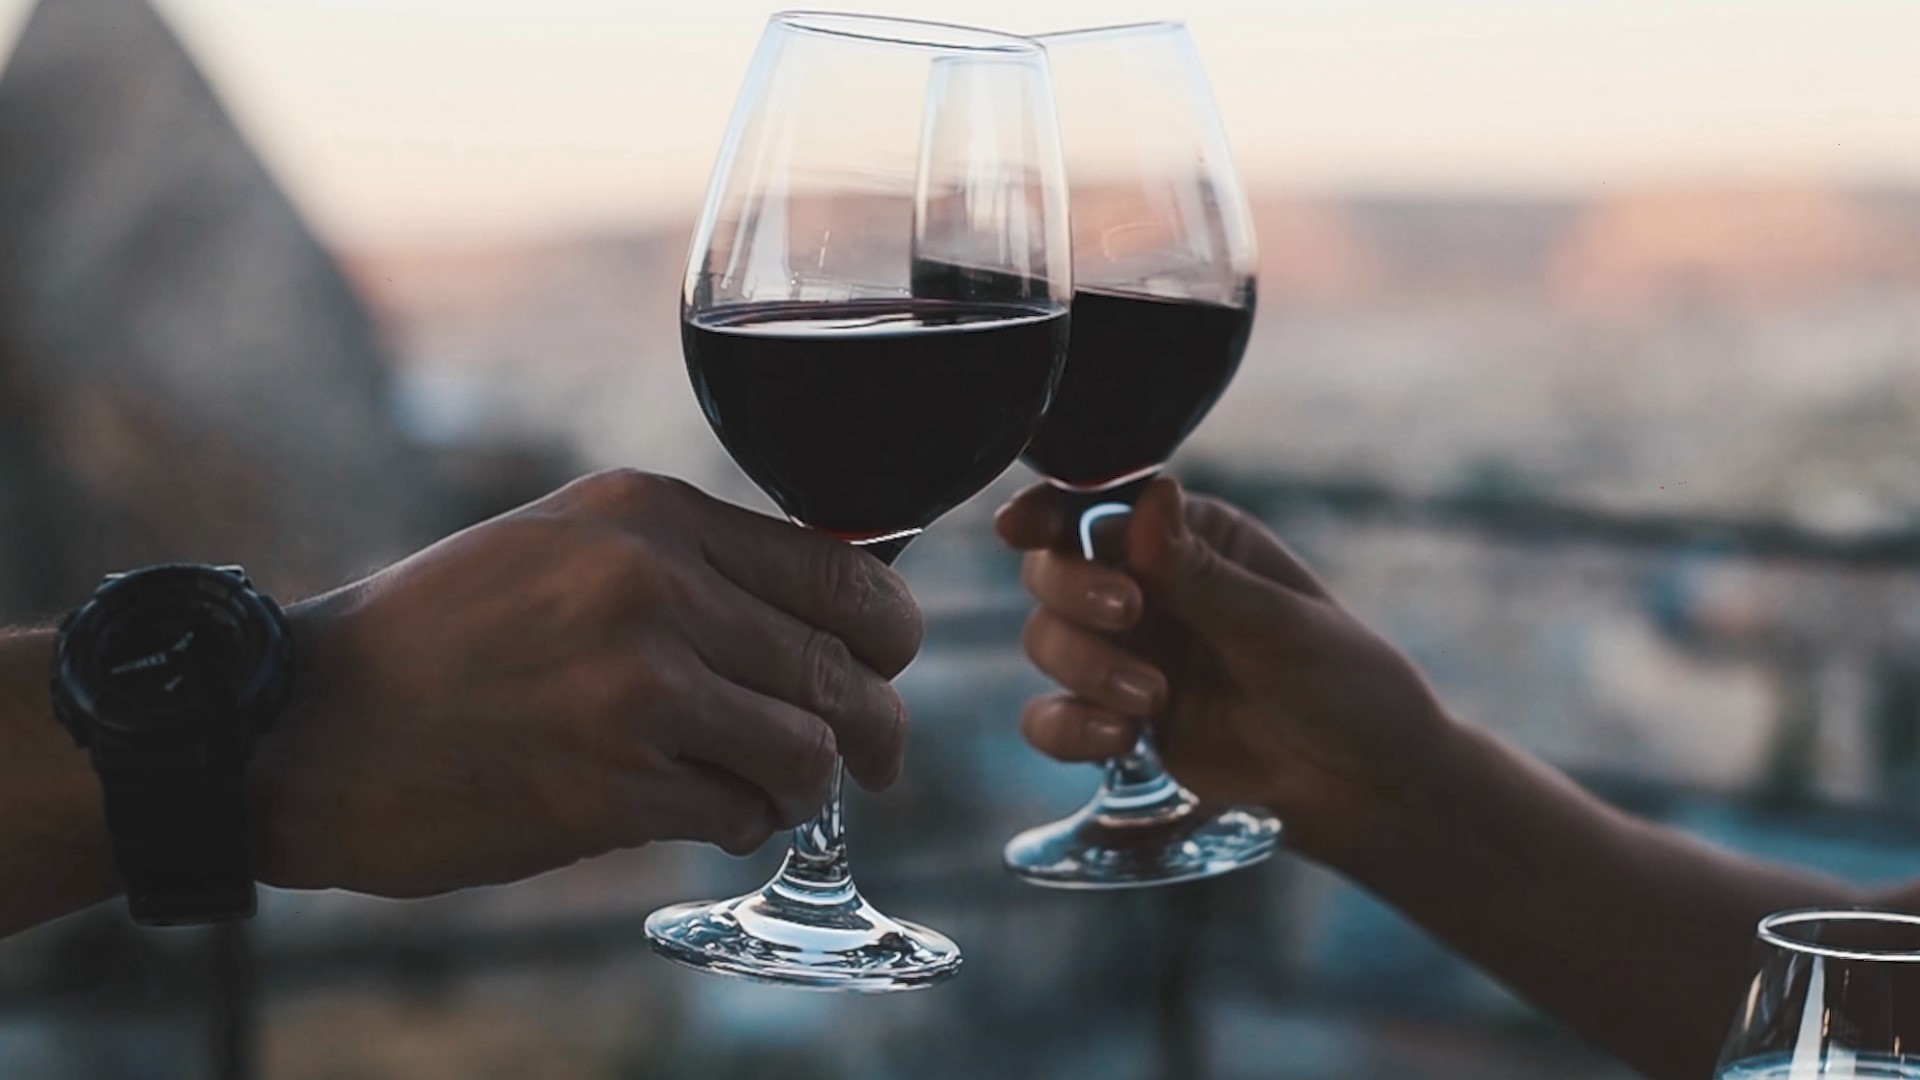 For a long time we've been told that having a few glasses of wine or alcohol a week can be good for us. A new study out of the UK suggests this may not be entirely true, in fact, the authors of the study say these conclusions are based on bad science. Veuer's Johana Restrepo has more.